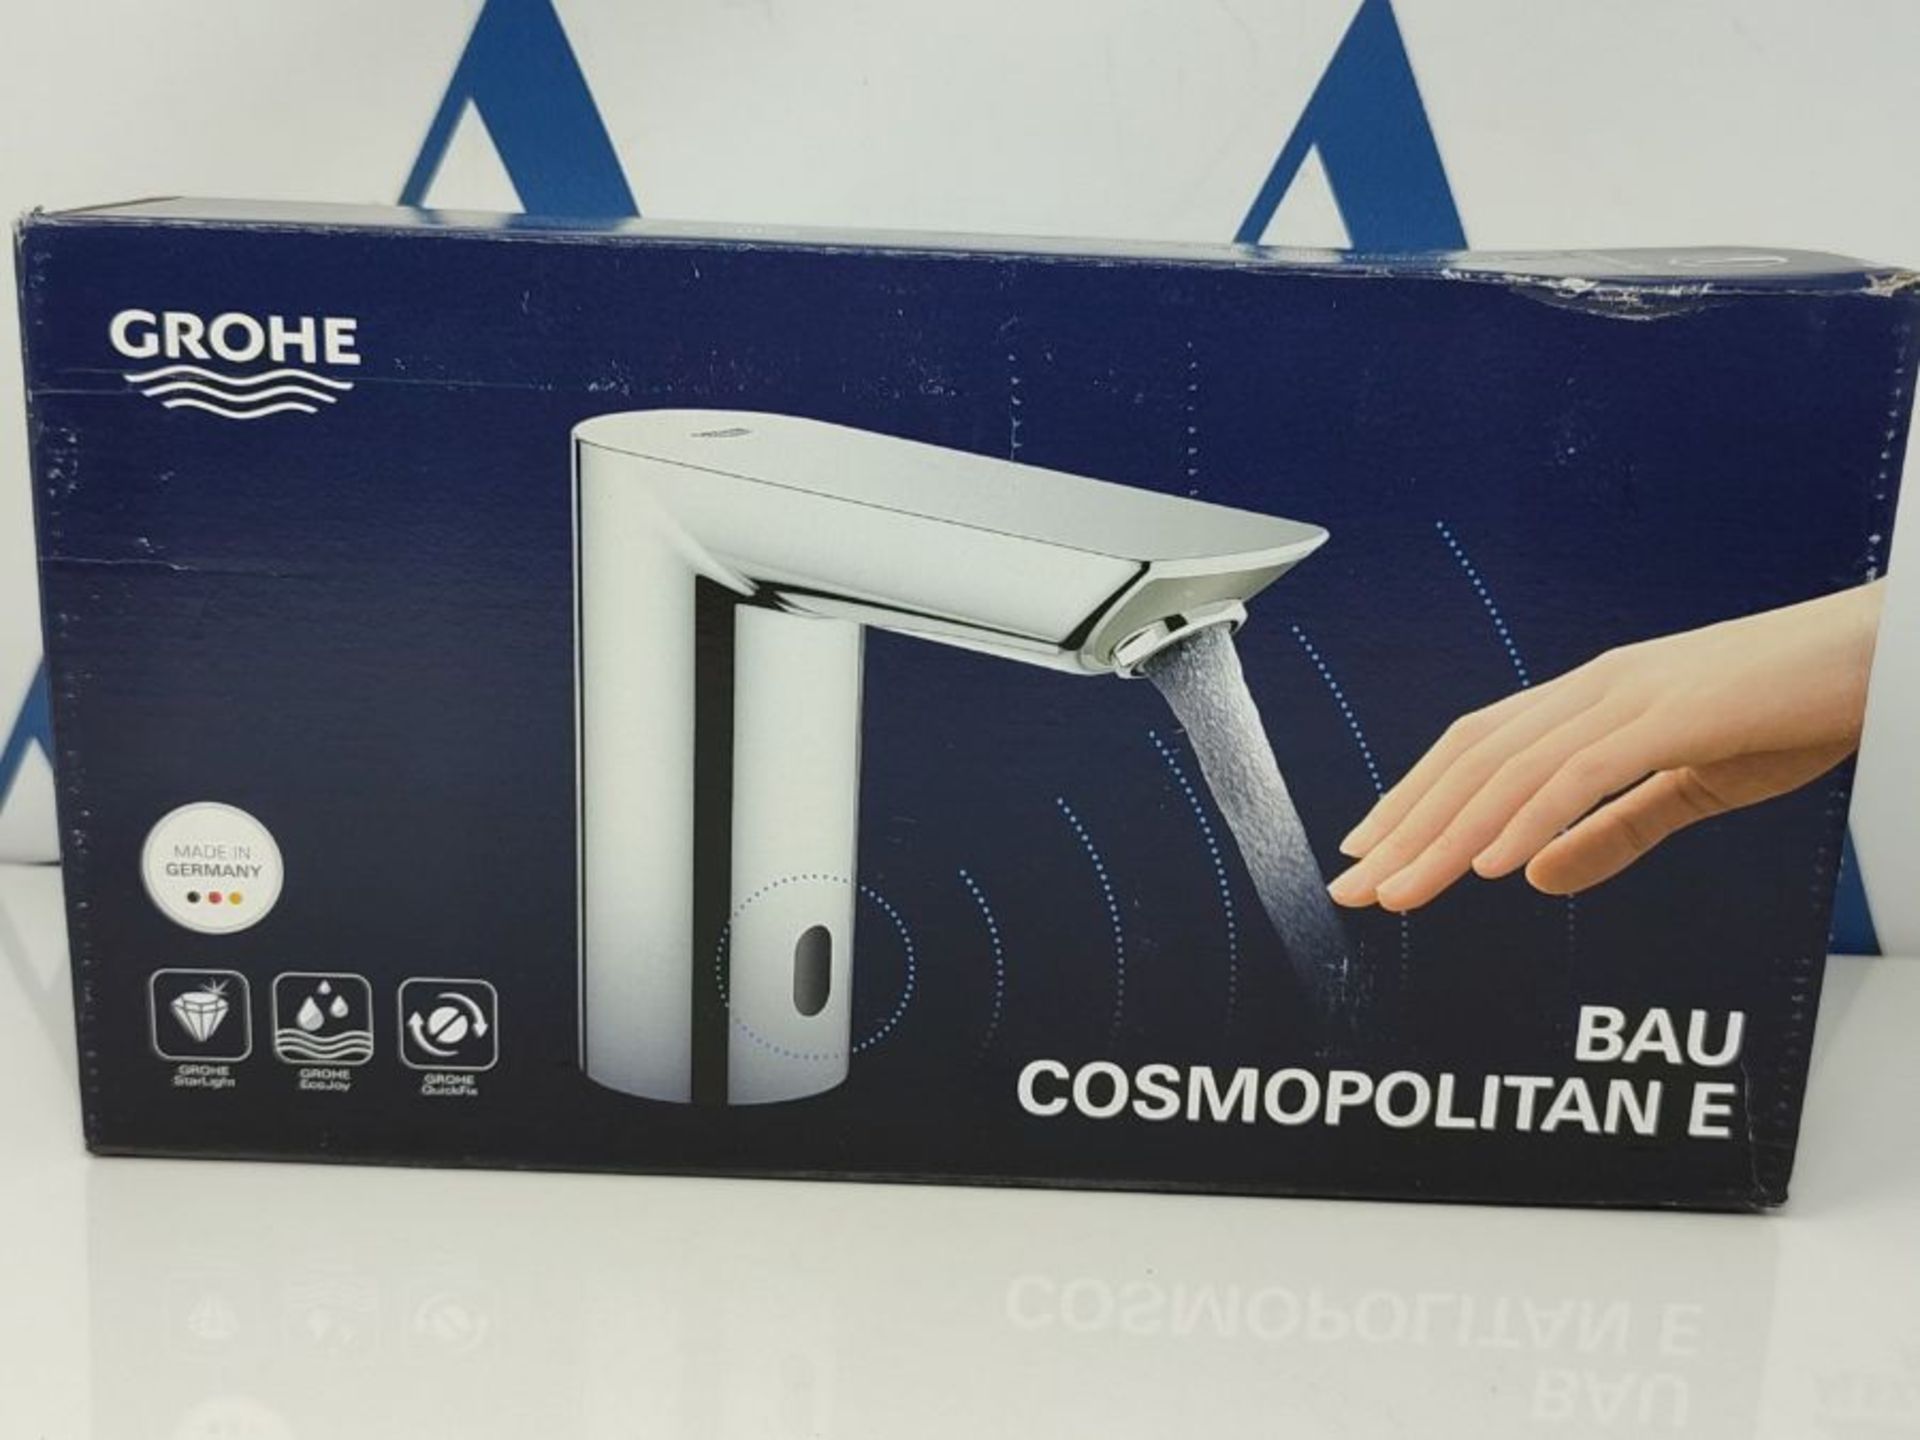 RRP £230.00 GROHE Bau Cosmopolitan E - Infrared Sensor Touchless Basin Mixer Tap with Mixing Devic - Image 5 of 6